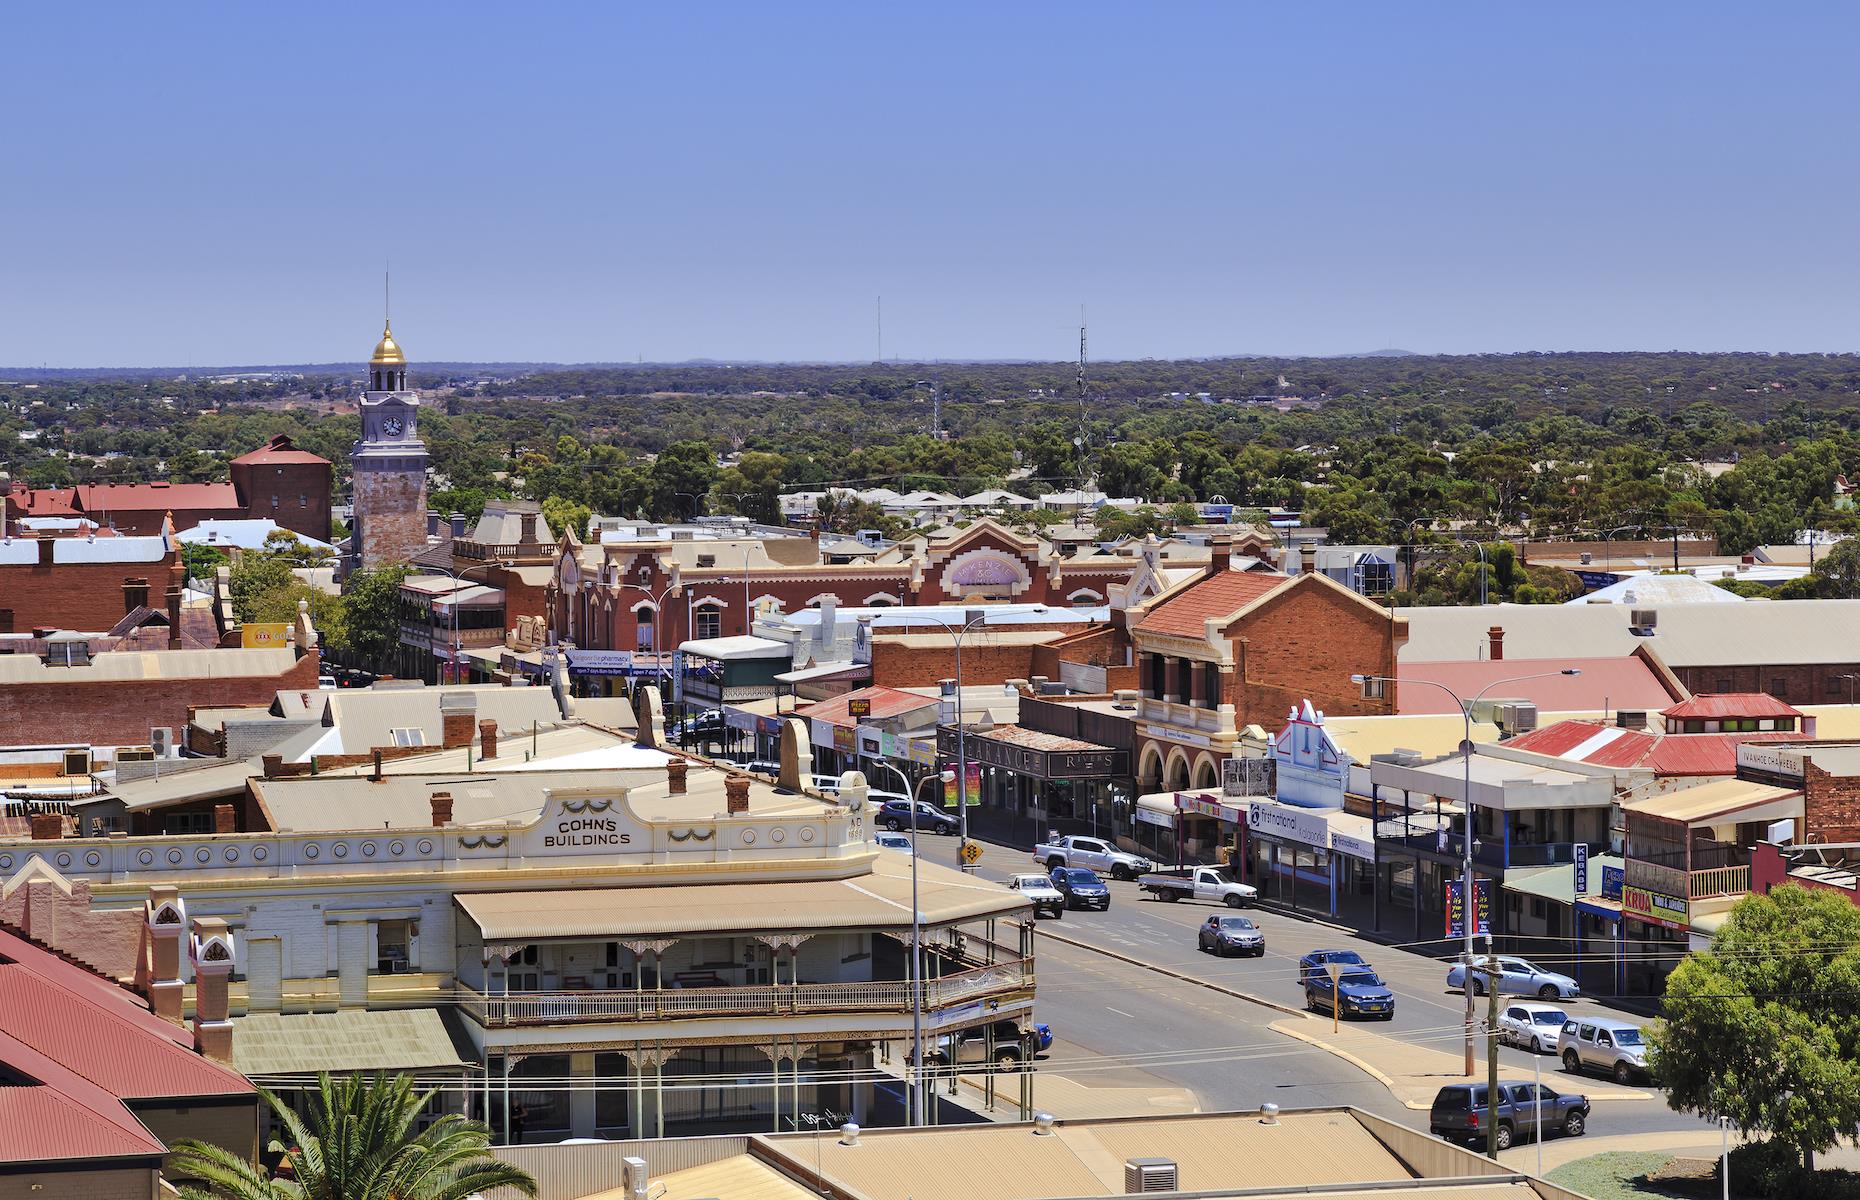 <p>The largest Outback city in Western Australia, Kalgoorlie was built on gold and a trip here will transport you to its gold rush days. Before Irish prospectors Paddy Hannan, Tom Flanagan and Dan Shea found alluvial gold in 1893, this stark and isolated landscape on the edge of the Nullarbor Plain was the domain of the Ballardong Noongar people. Thousands of prospectors soon descended and houses, shops, pubs and brothels were built. The town of Kalgoorlie was gazetted in 1894 and Boulder, just nearby, in 1896. The region became the epicenter of WA's mining economy and remains so today. See what the early miners endured on a tour of <a href="http://www.hannansnorth.com.au/">Hannans North Tourist Mine</a>, one of the area's first registered mines.</p>